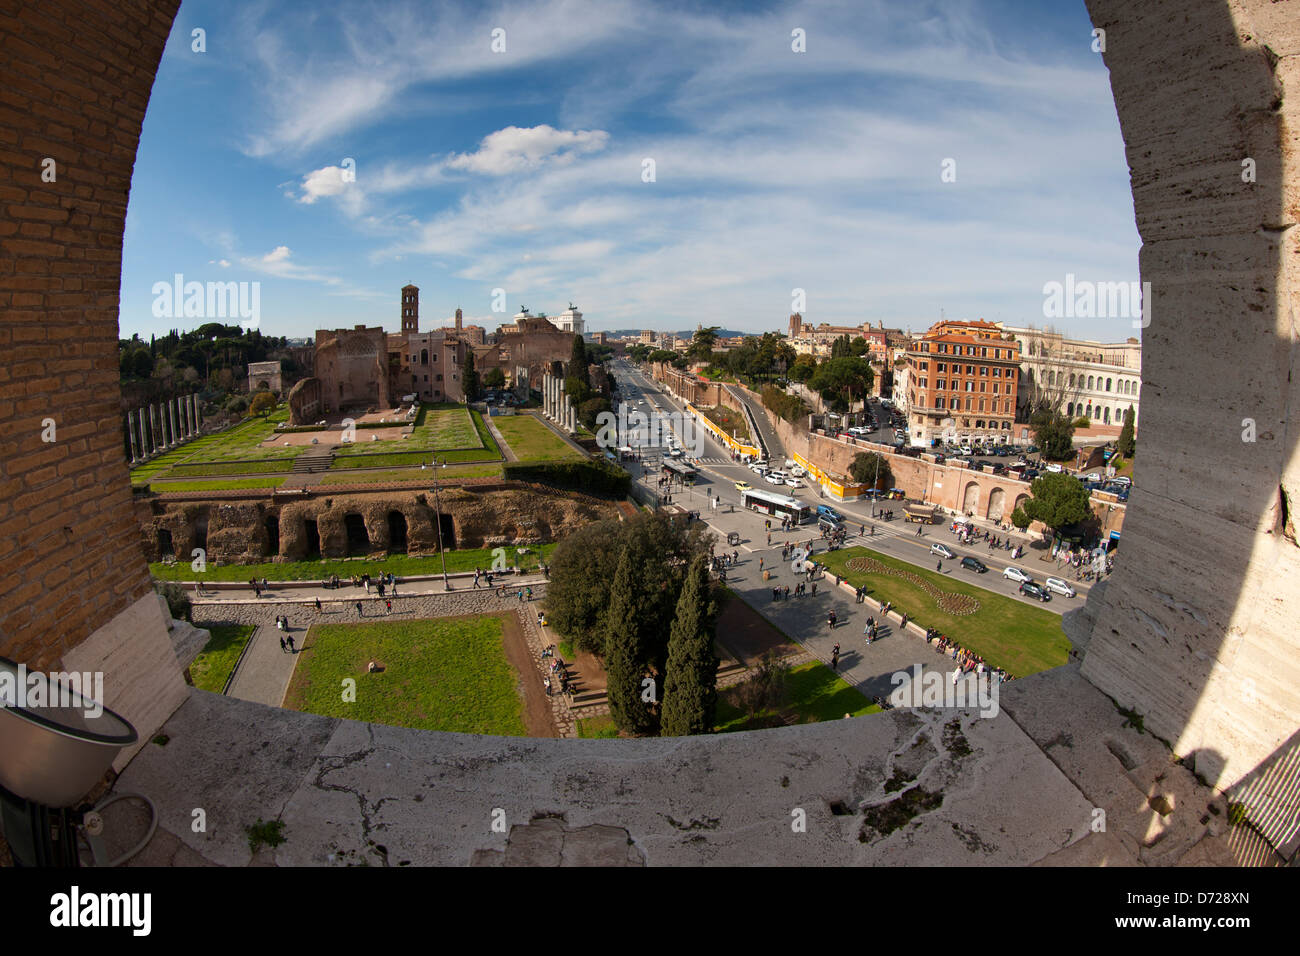 The Via dei Fori Imperiali viewed from the Colosseum Stock Photo